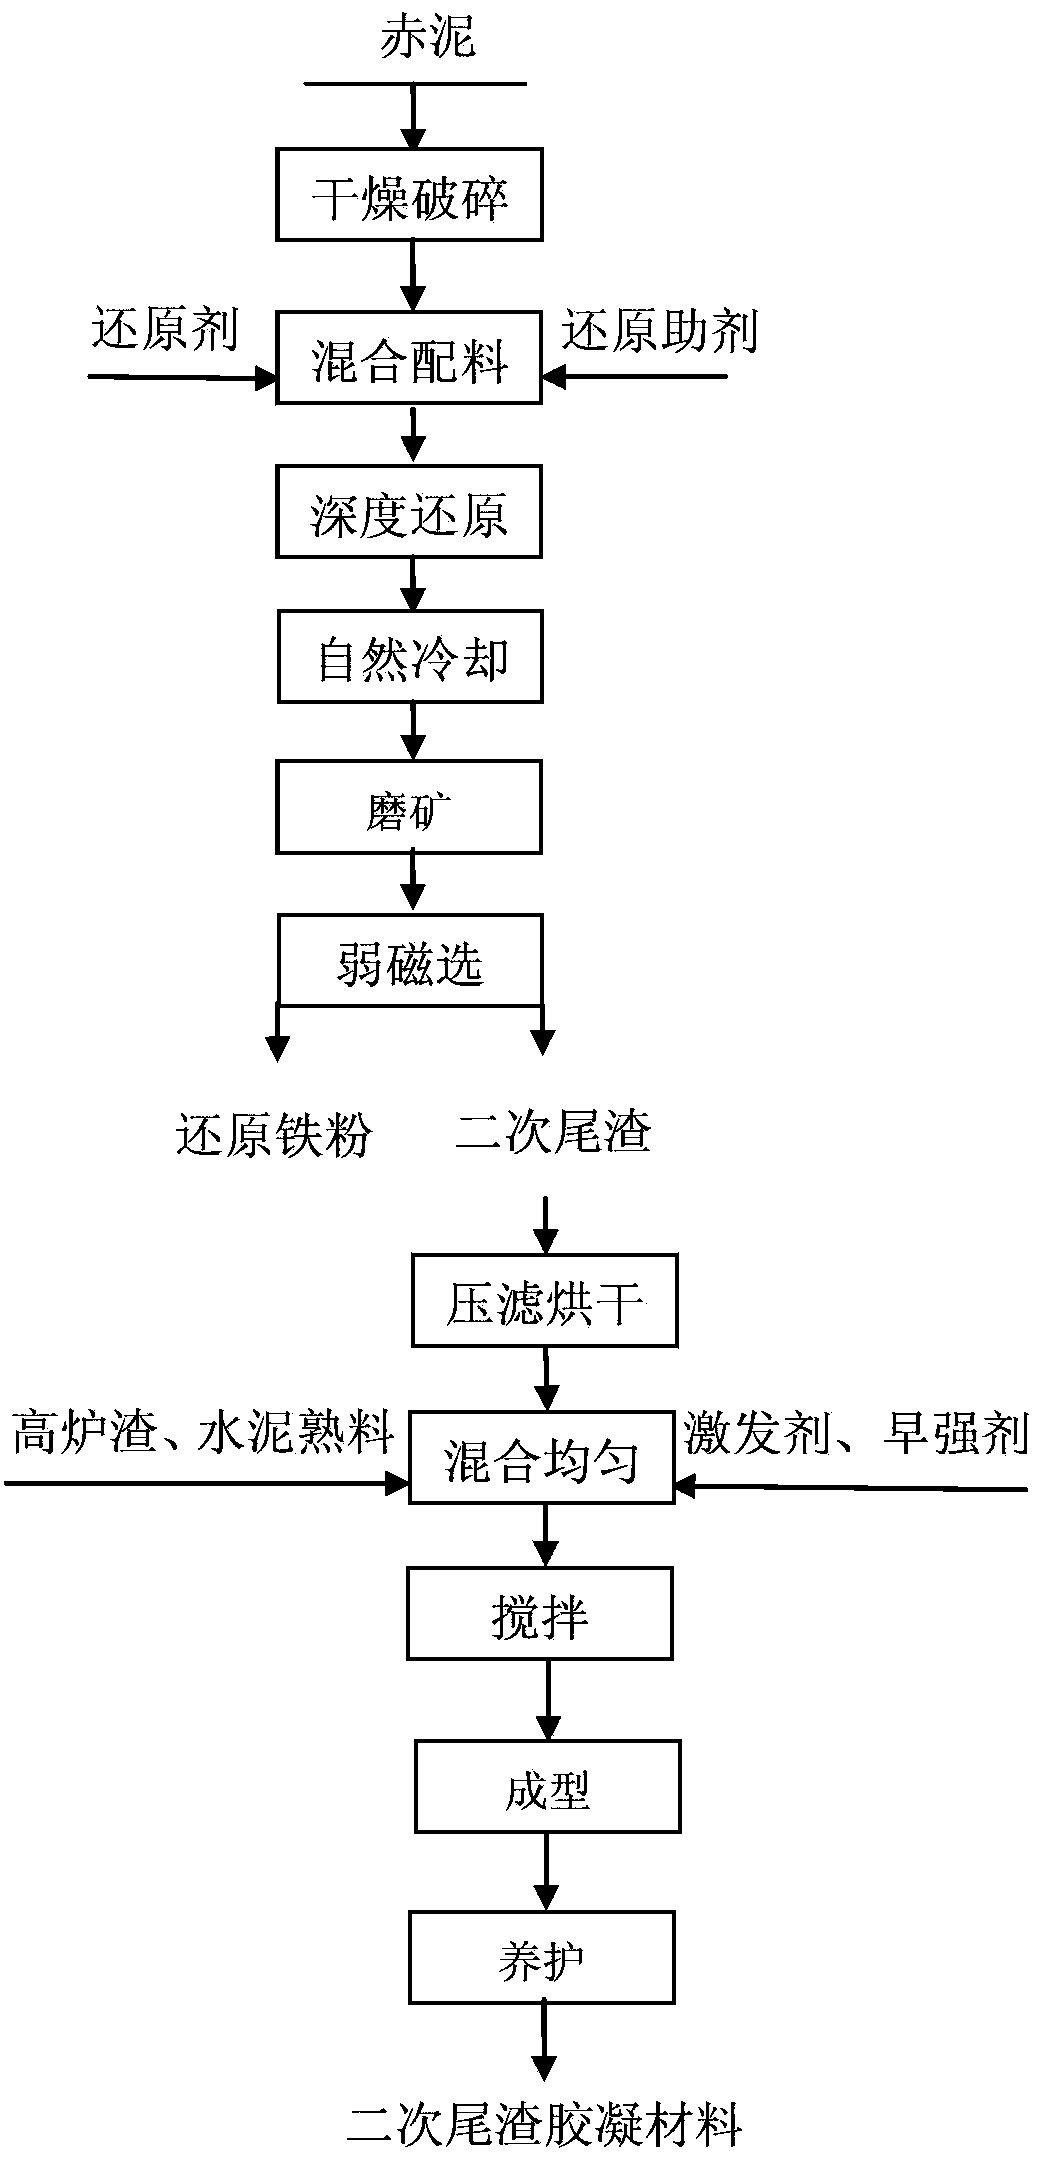 Method used for extracting iron from red mud by drastic reduction and method used for preparing gel material from secondary tailings